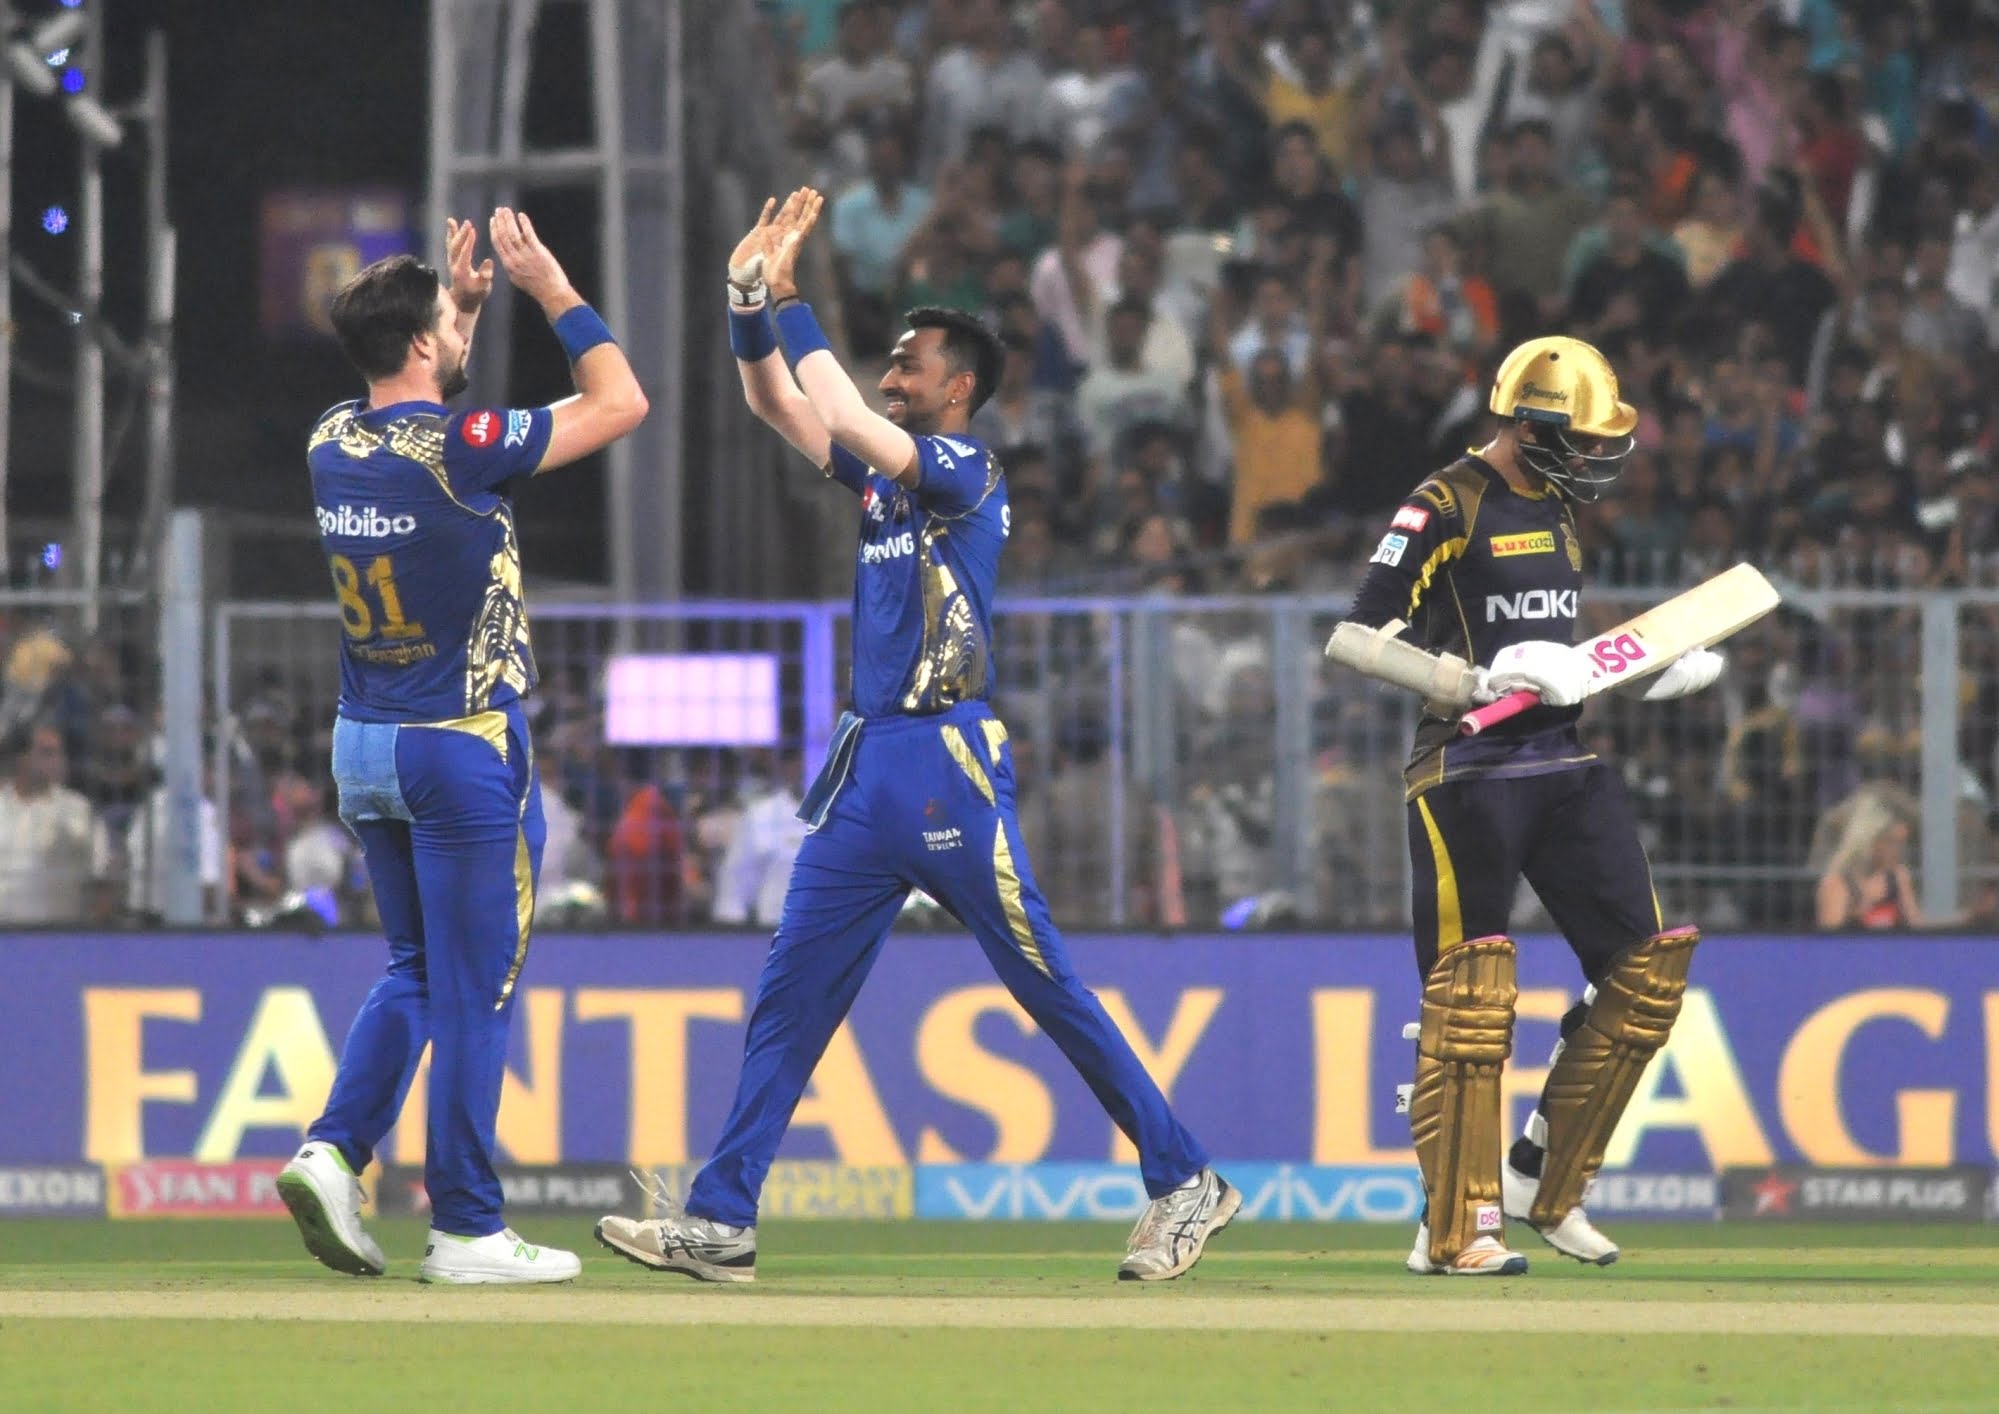 IPL 2019 Match 47 (KKR vs MI) Five Things To Watchout In The Game